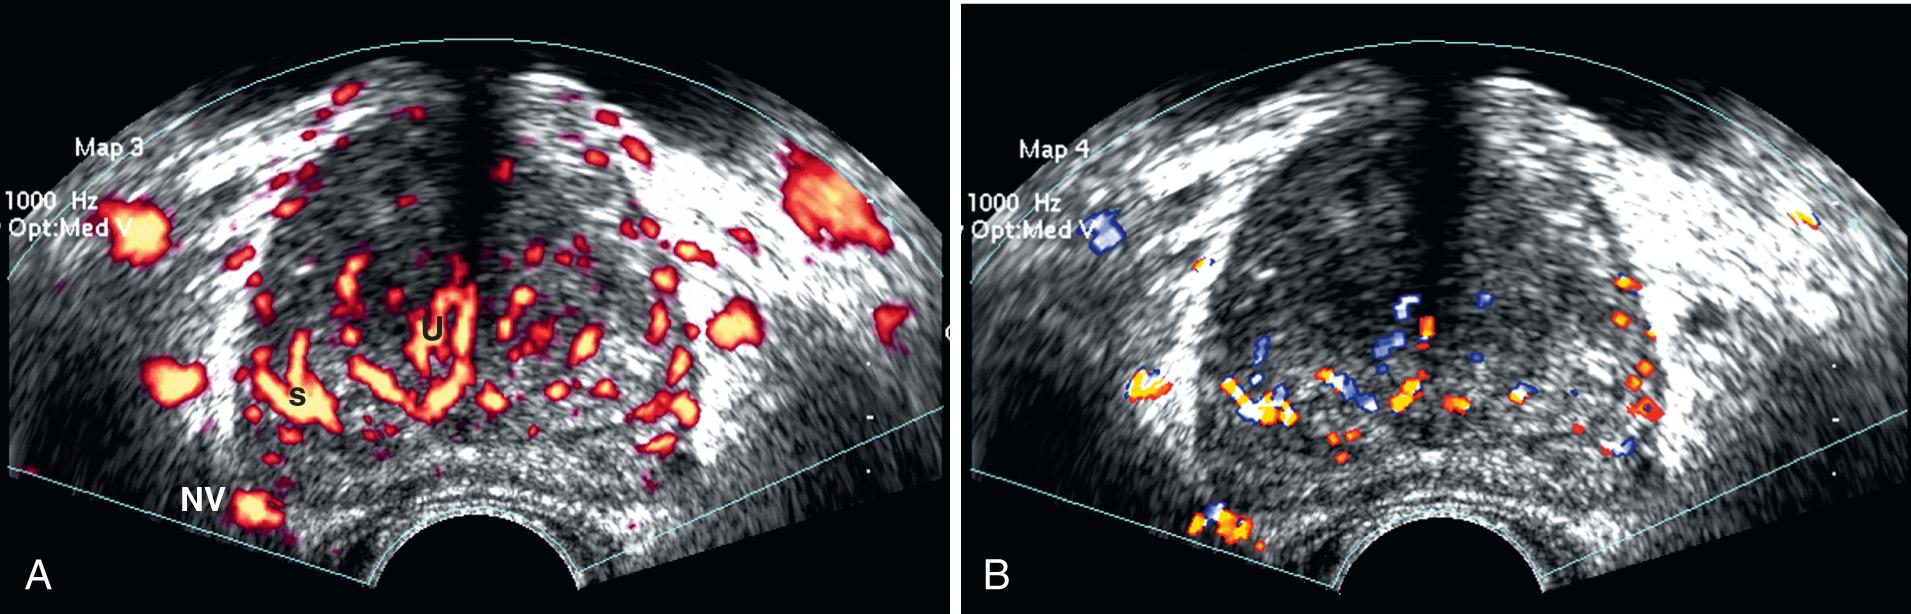 FIG. 10.5, Normal Doppler Ultrasound Anatomy in Patient With Moderate Benign Prostatic Hyperplasia (BPH).